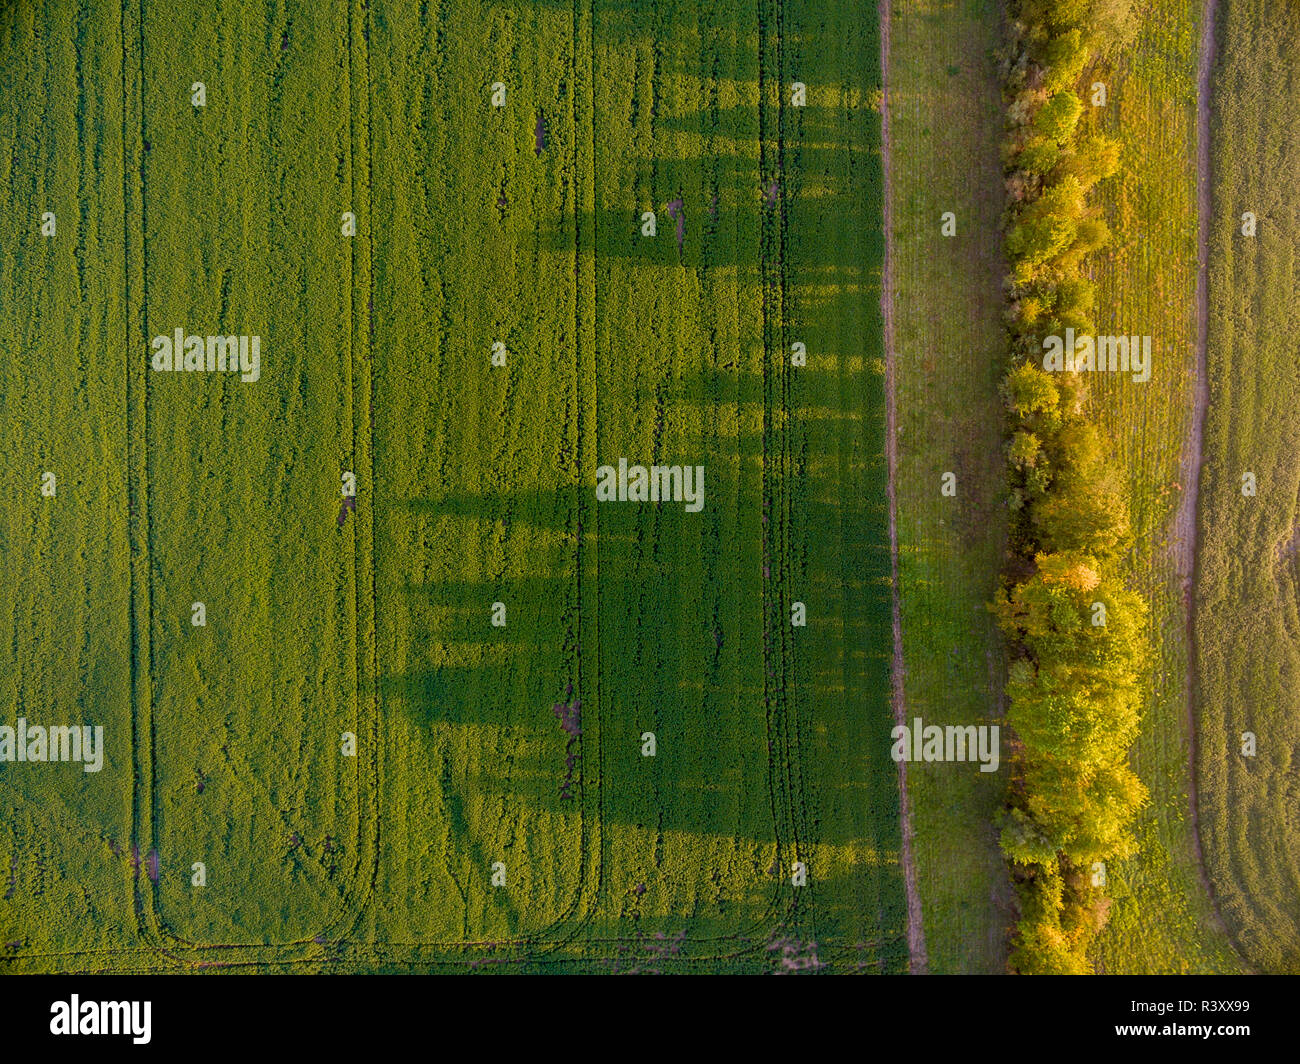 Wheat field and shadows from trees, Marion County, Illinois Stock Photo